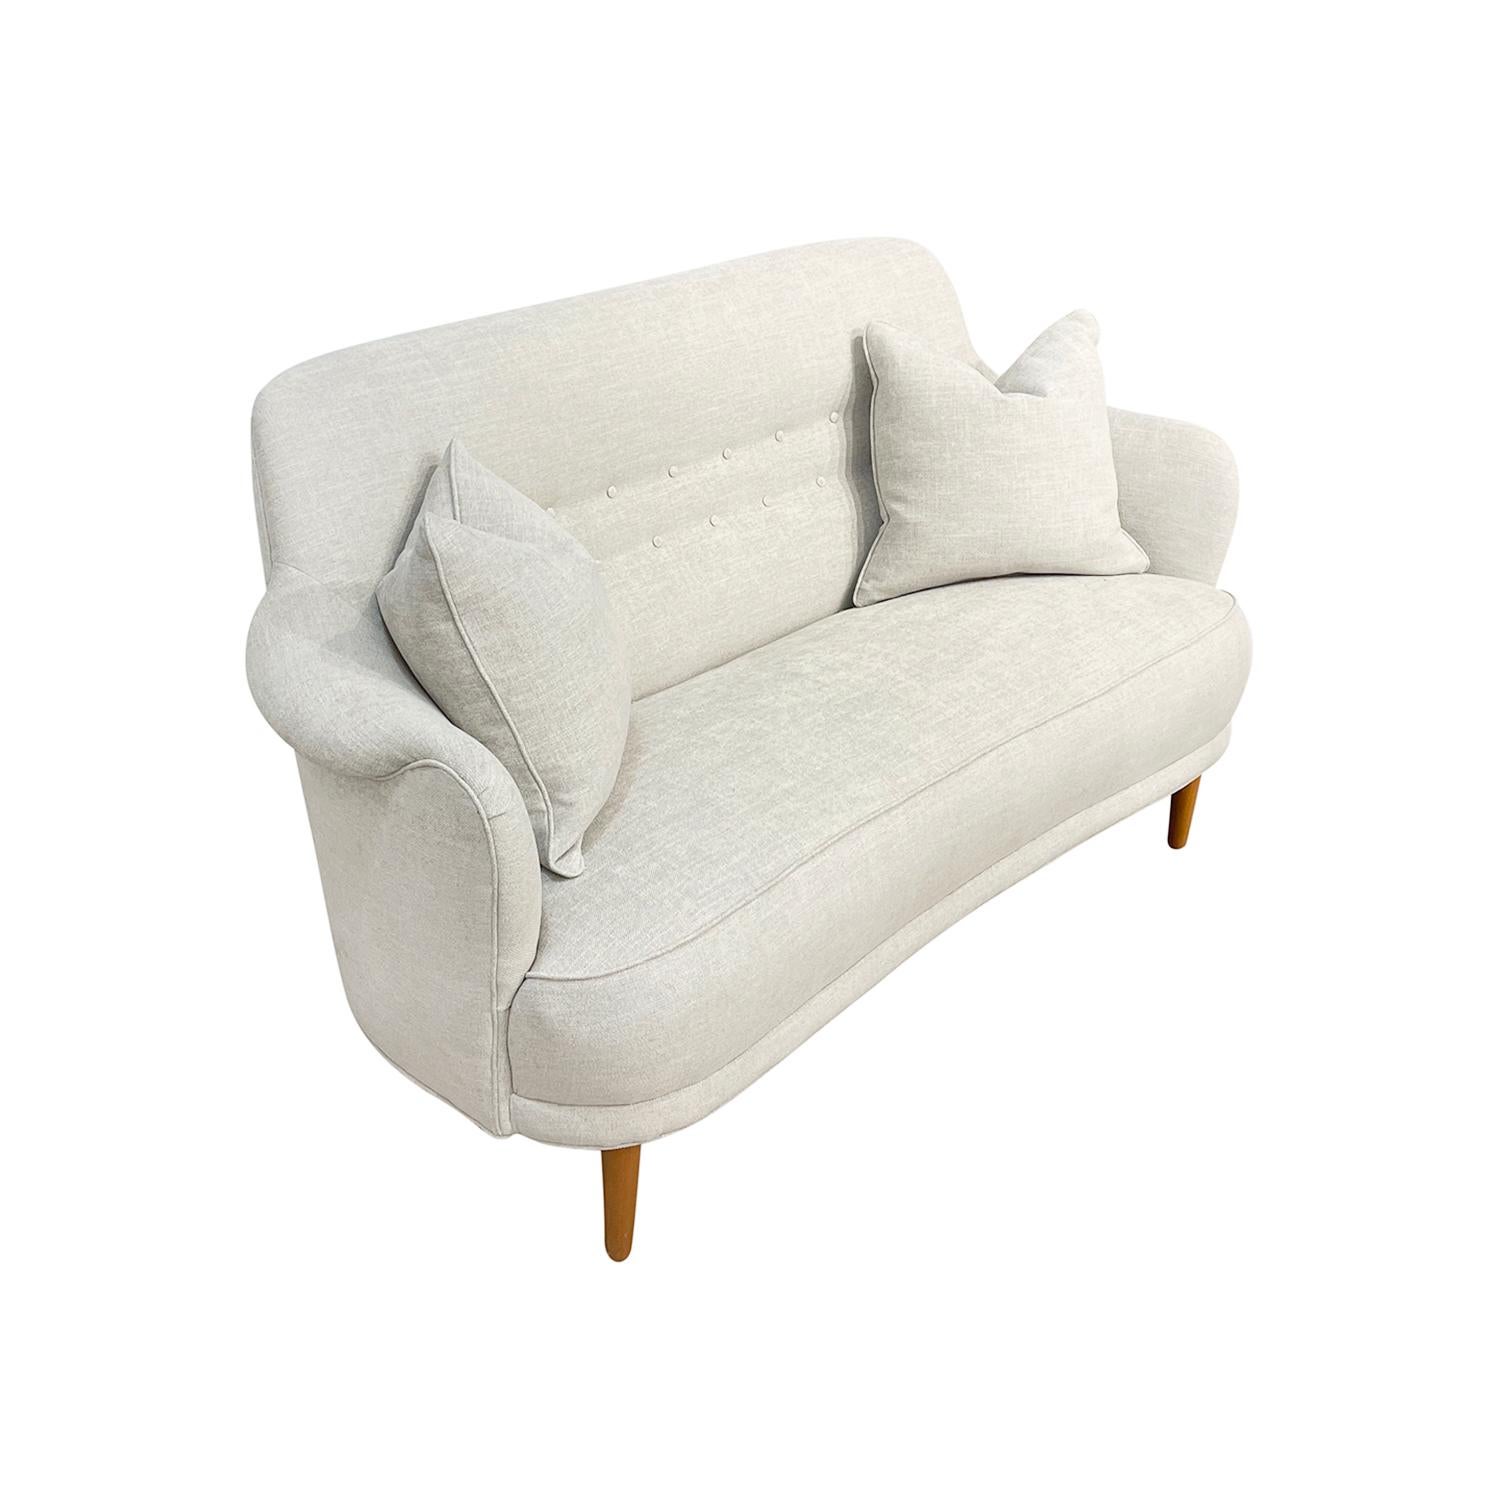 A vintage Mid-Century modern Swedish two-seater 